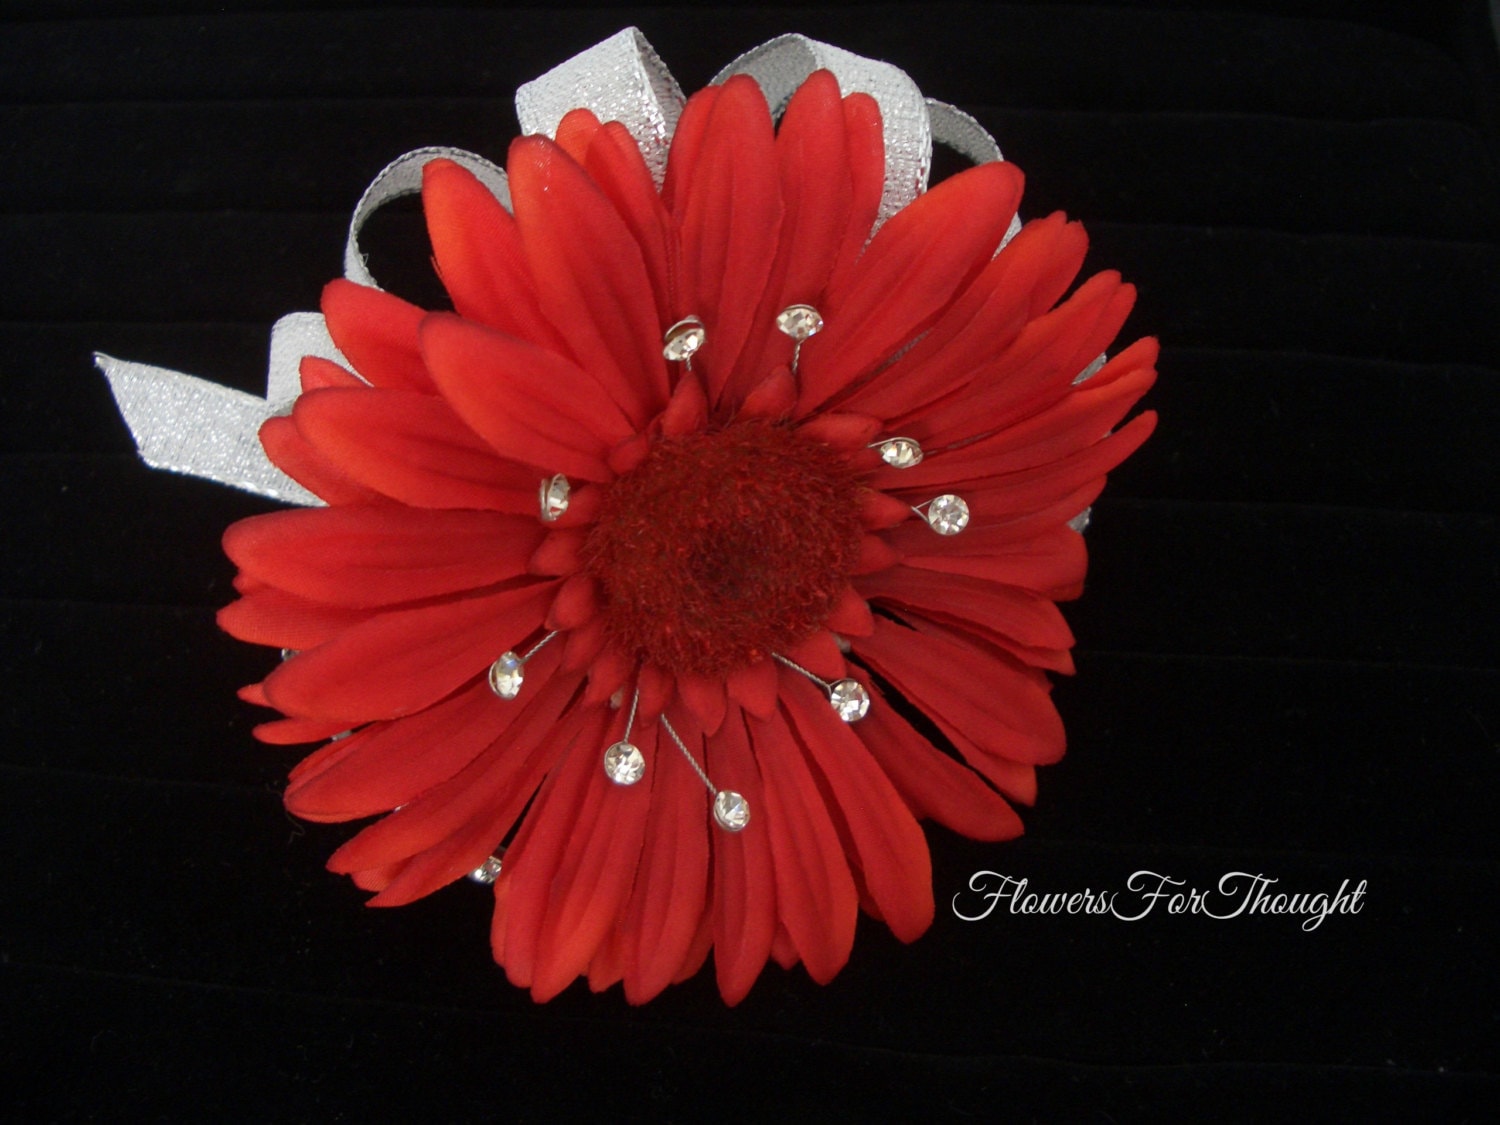 White Mini Gerbera Daisy and White Rose Wristlet Corsage (CBCCIT01) - Flower  Patch